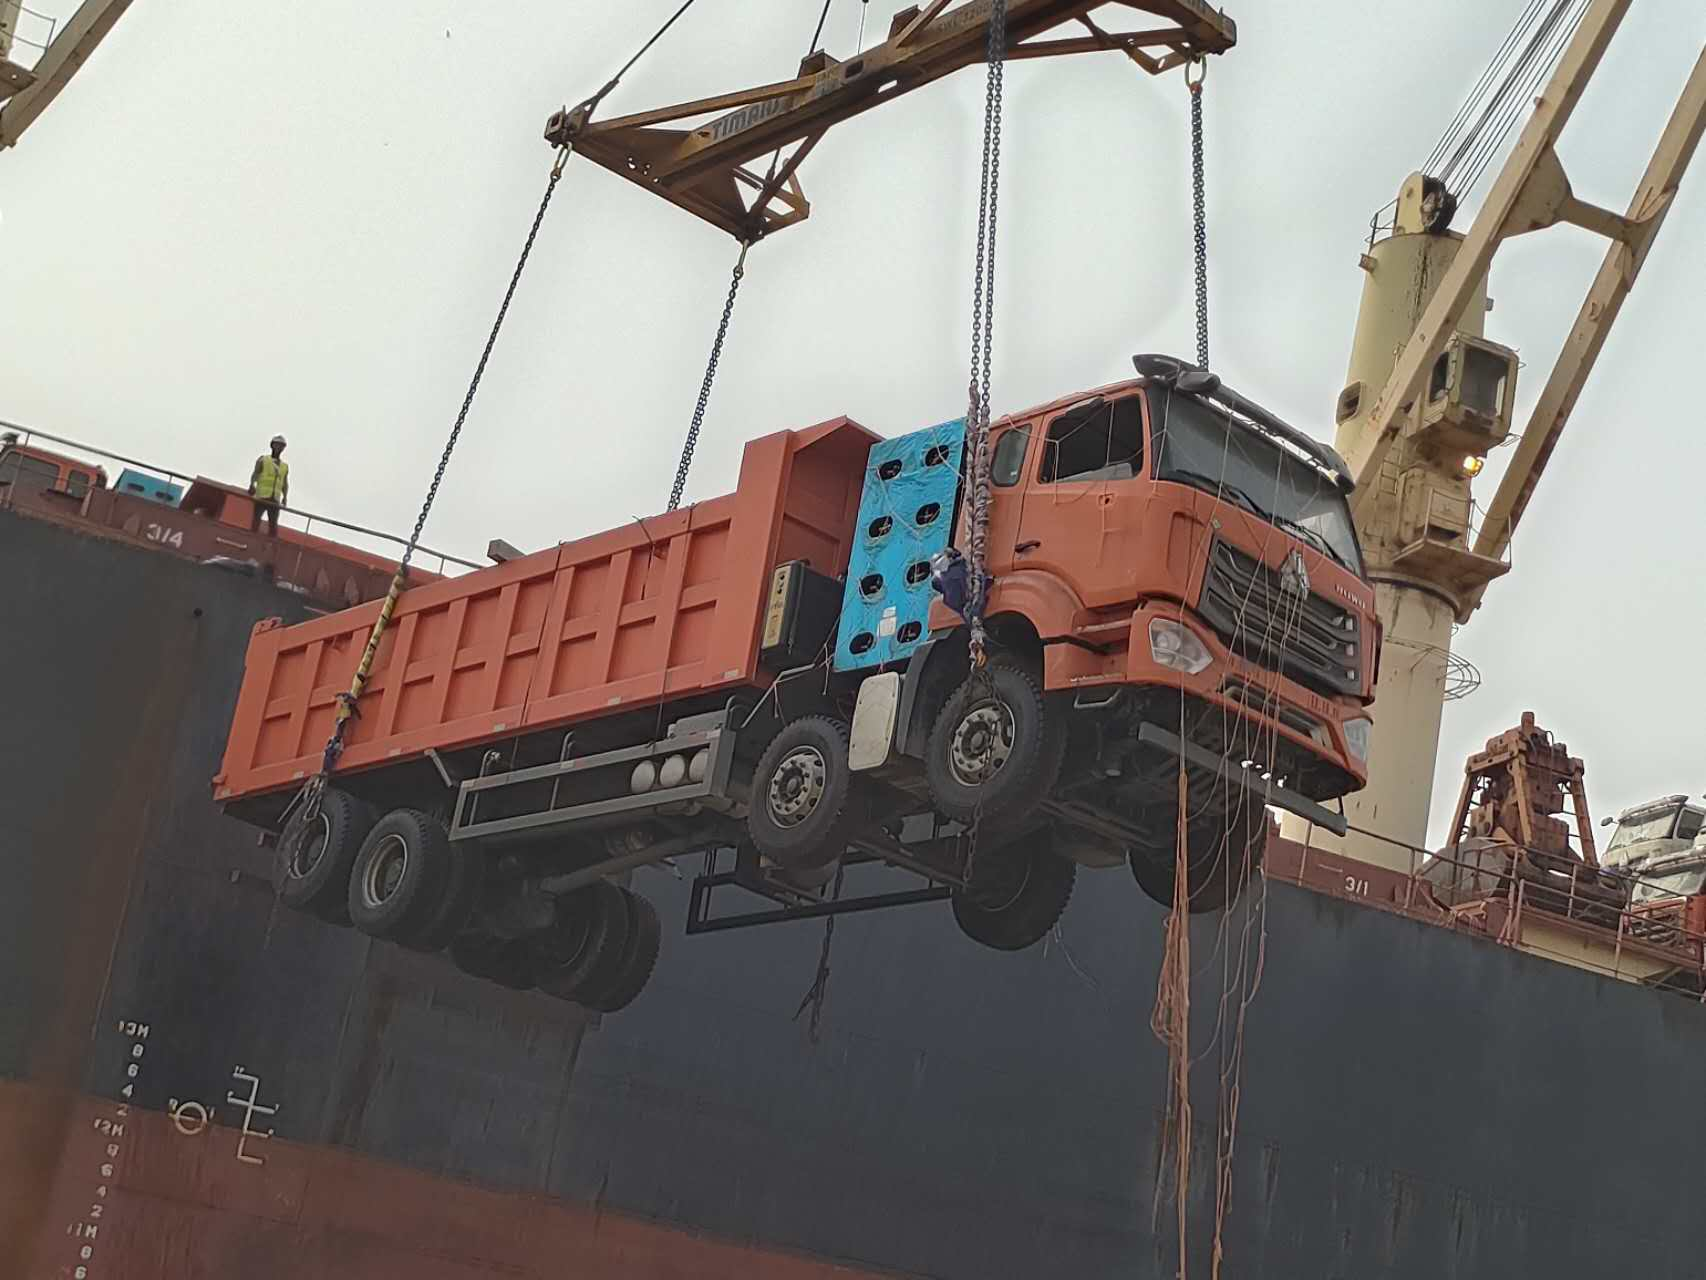 Nigeria's first CNG dump truck arrived at port and were unloaded from ship